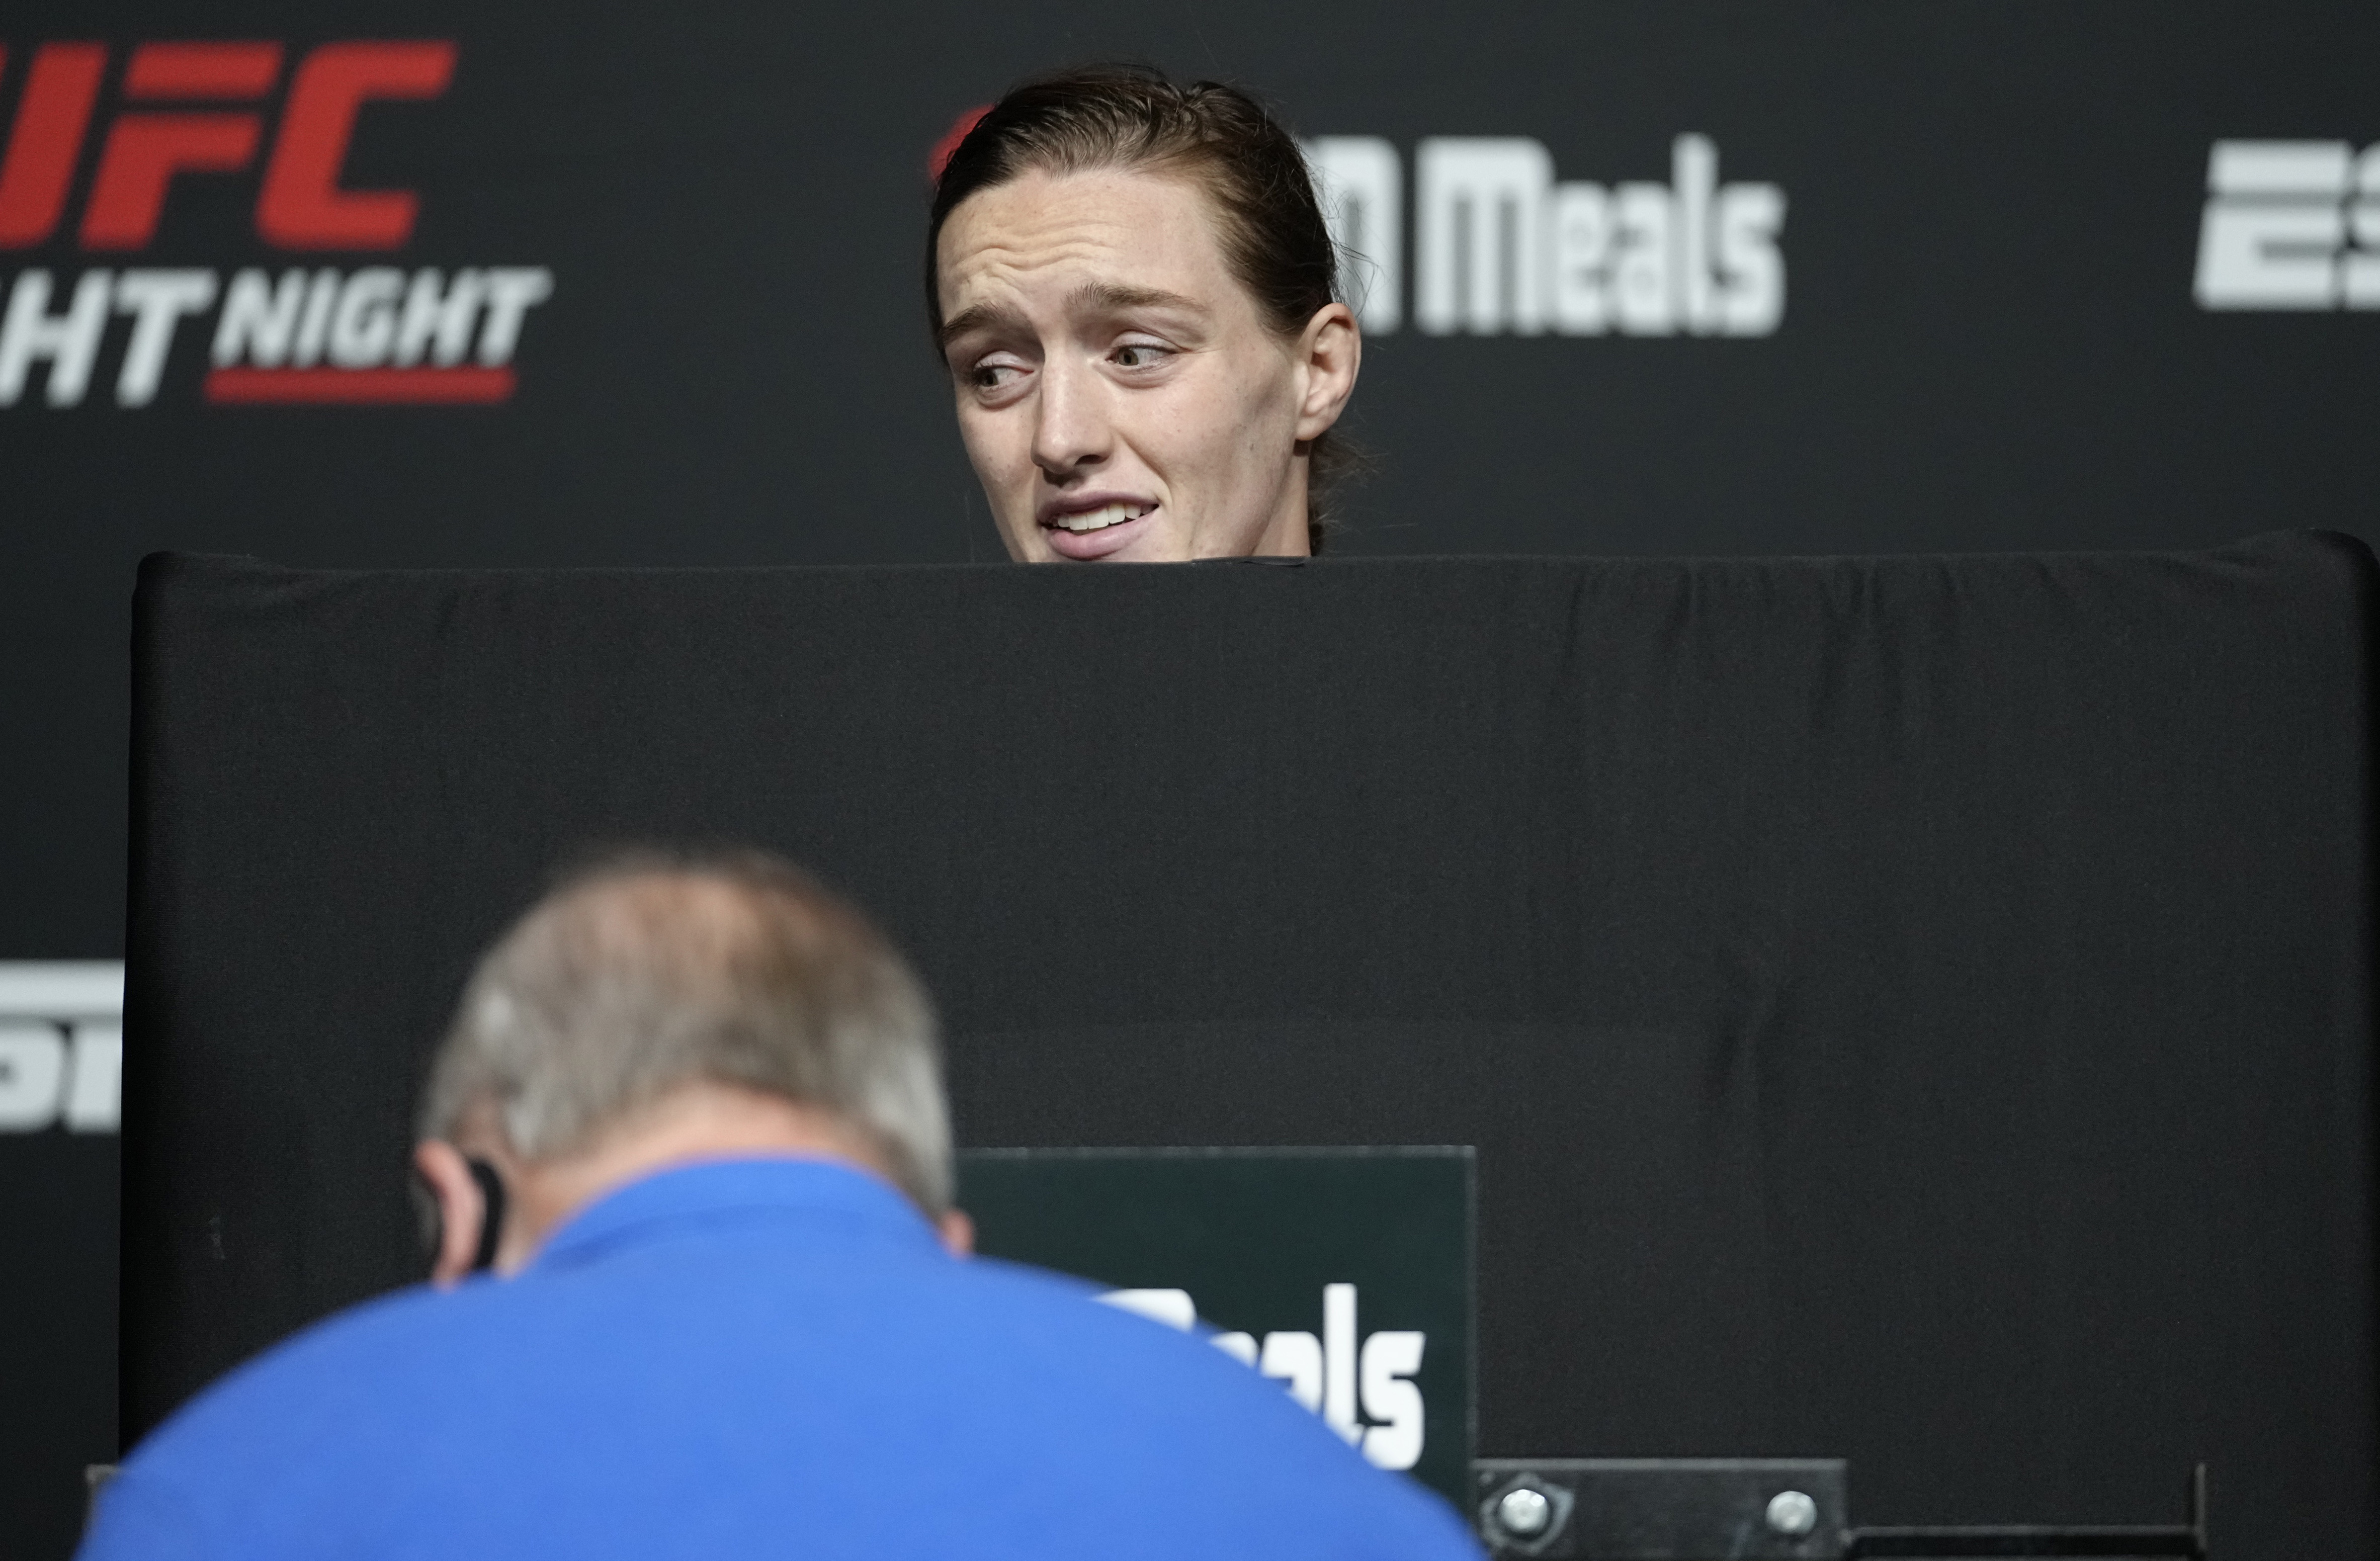 Aspen Ladd badly missed weight for UFC Vegas 38.